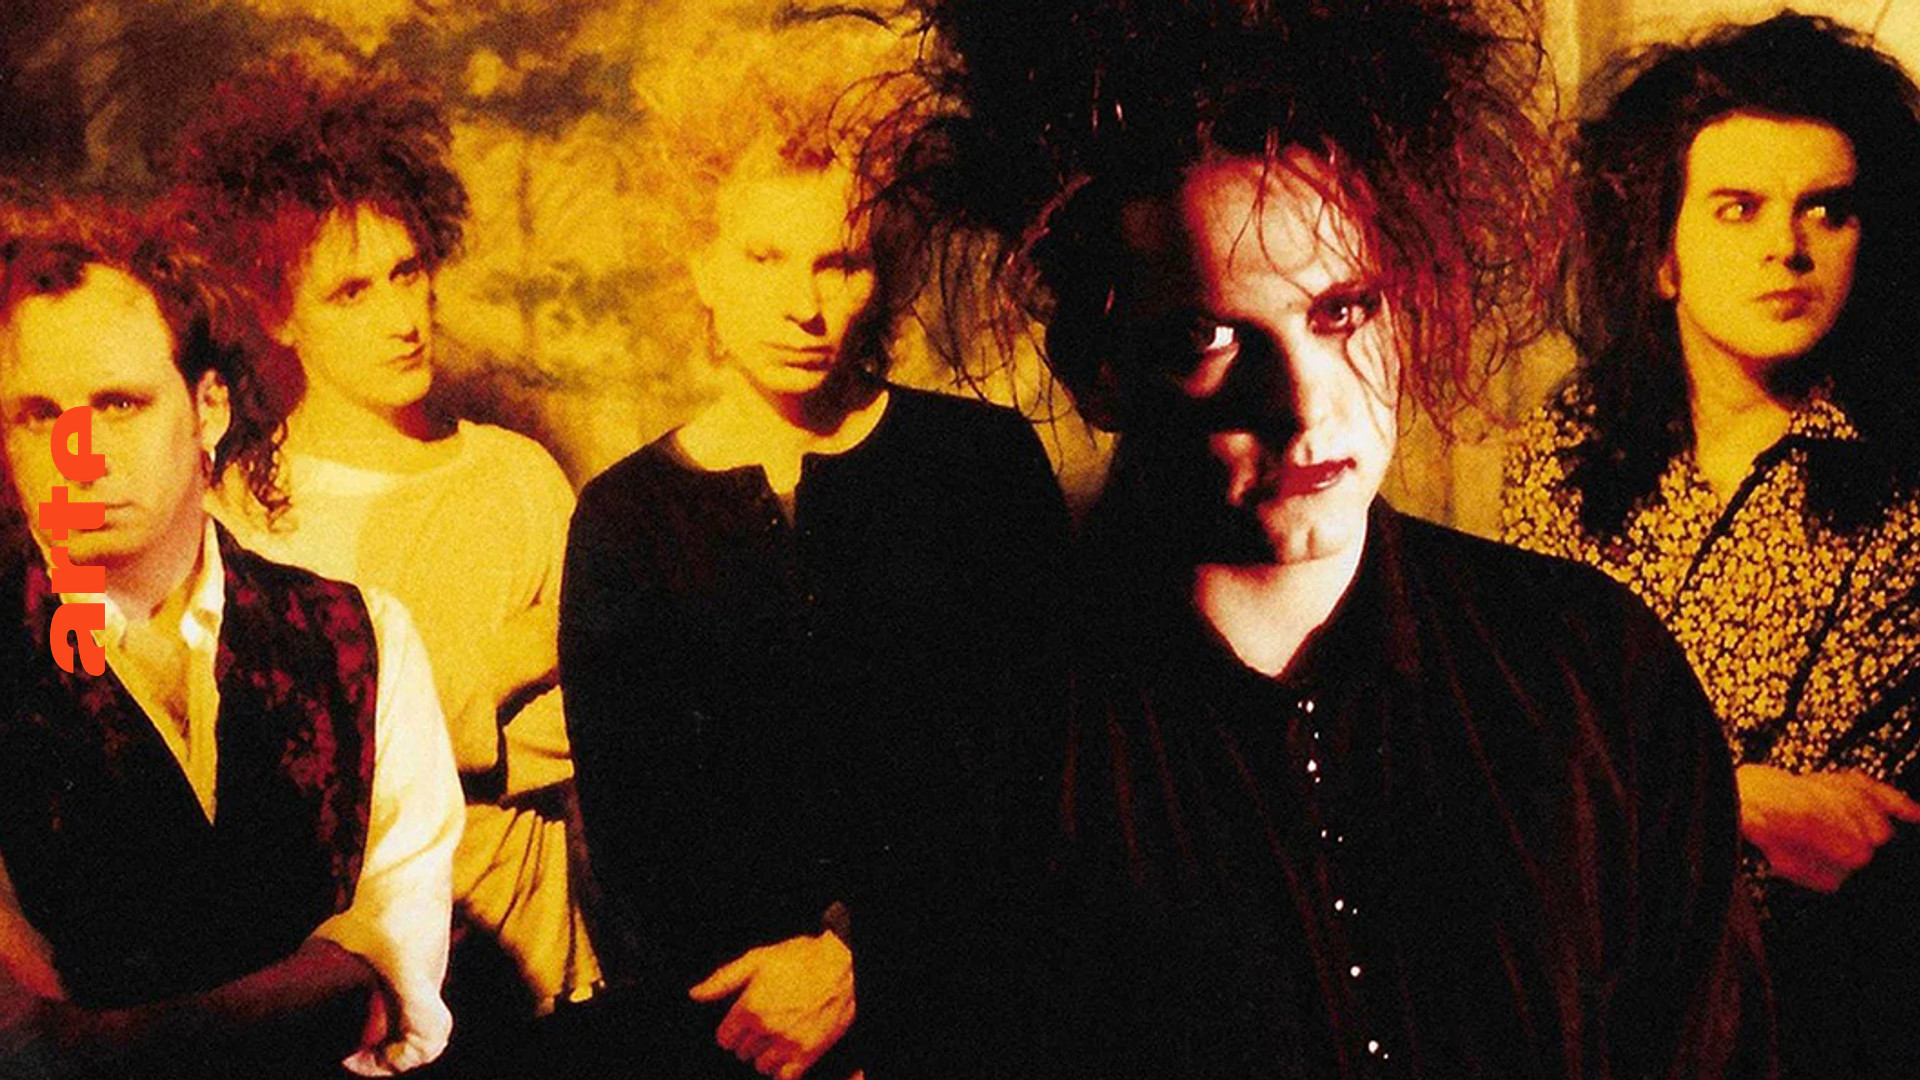 Blow up - The Cure im Film